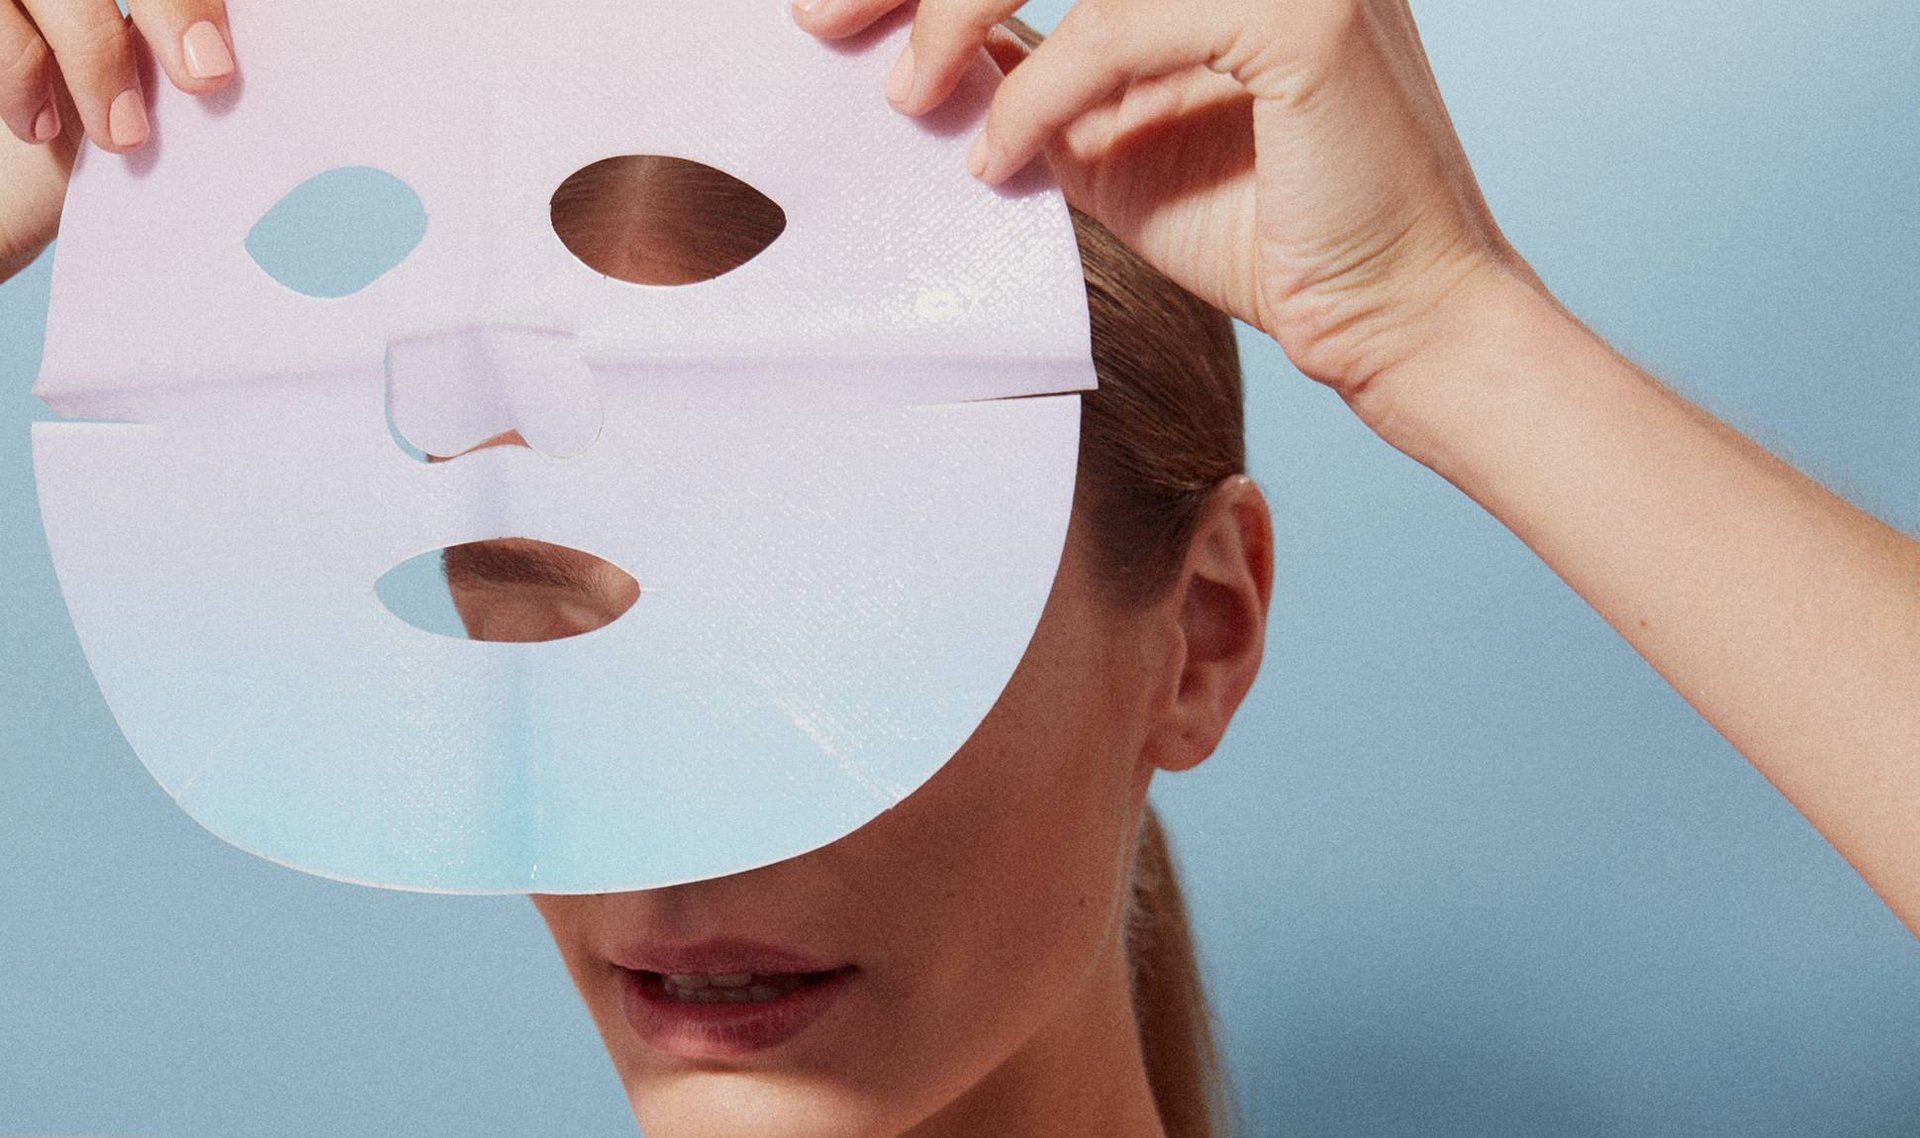 When Is the Best Time to Use a Face Mask?